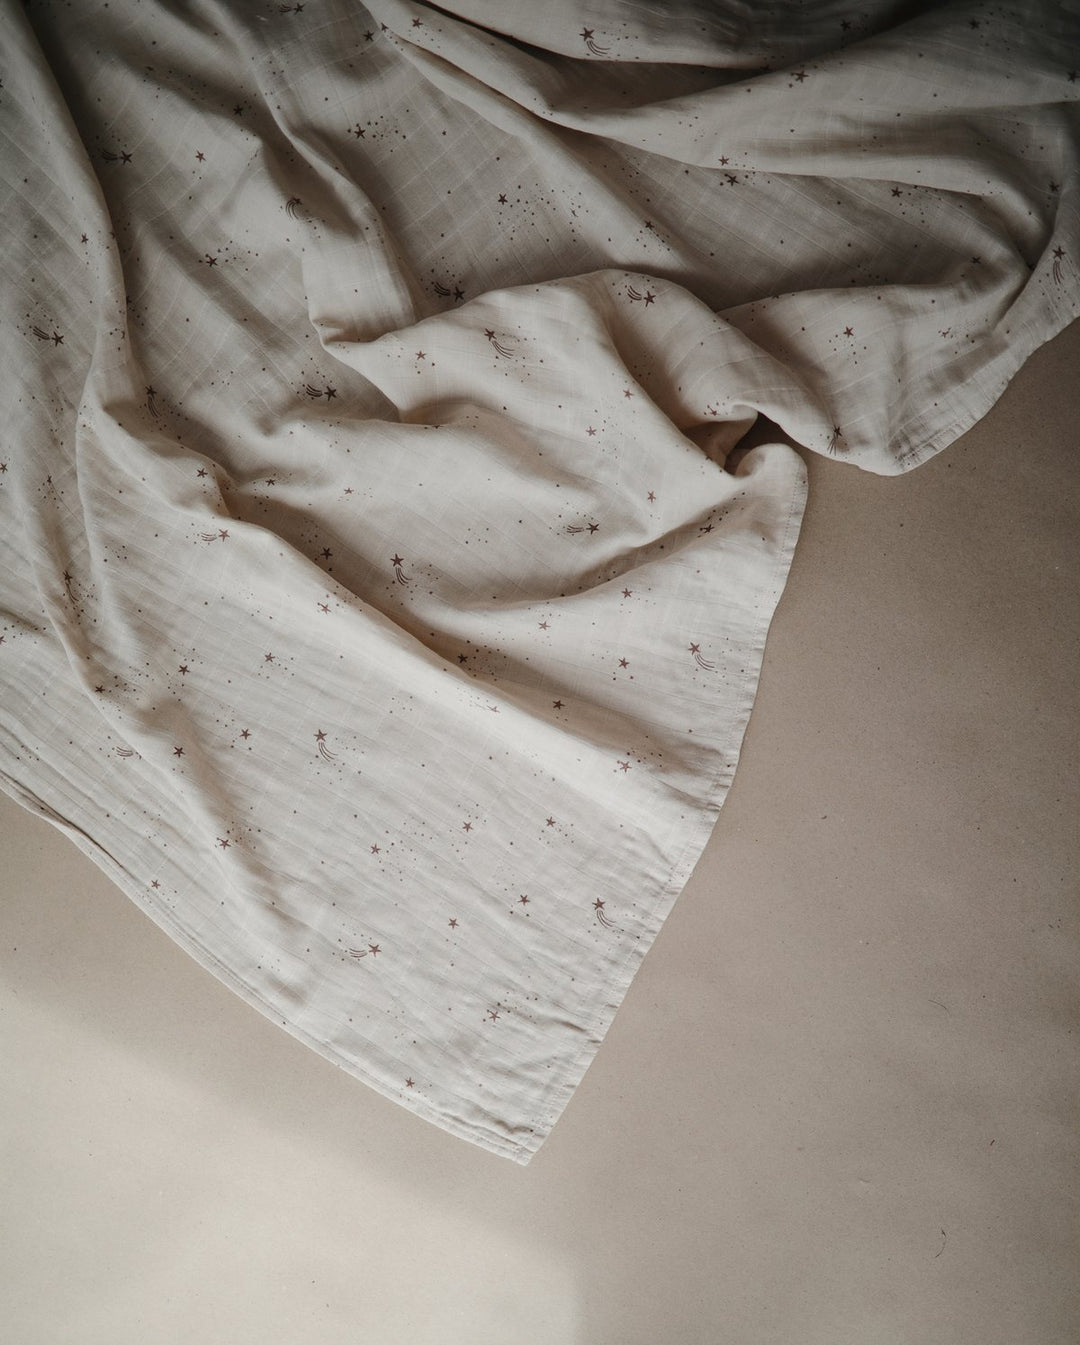 Mushie large muslin organic cotton baby swaddle blanket with falling stars print neutral